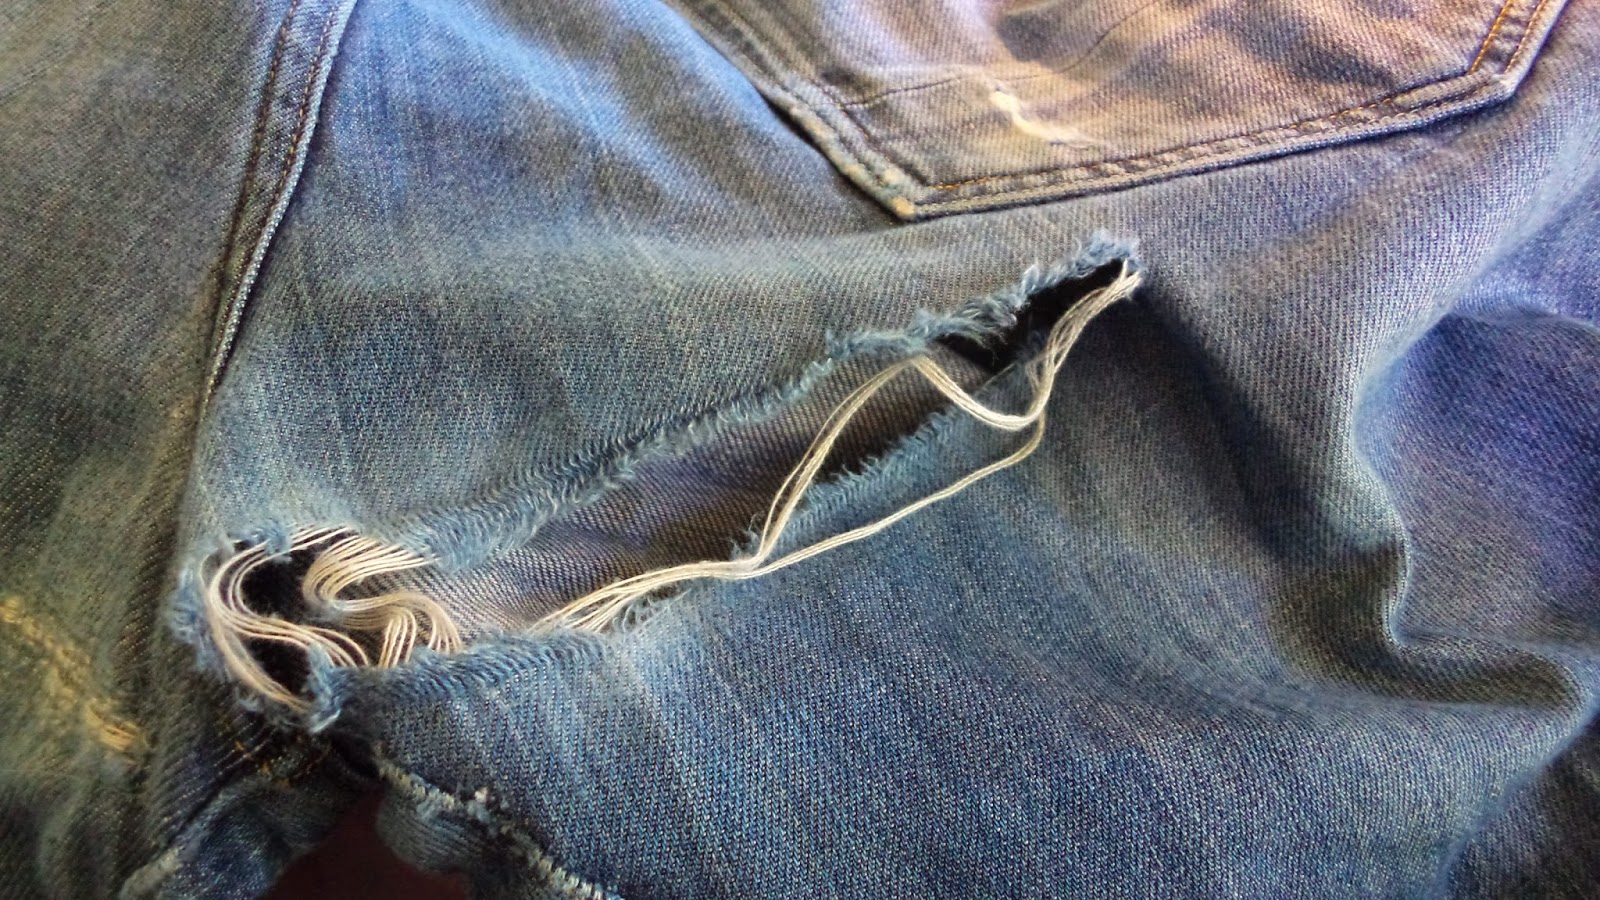 jeans tearing at the bottom